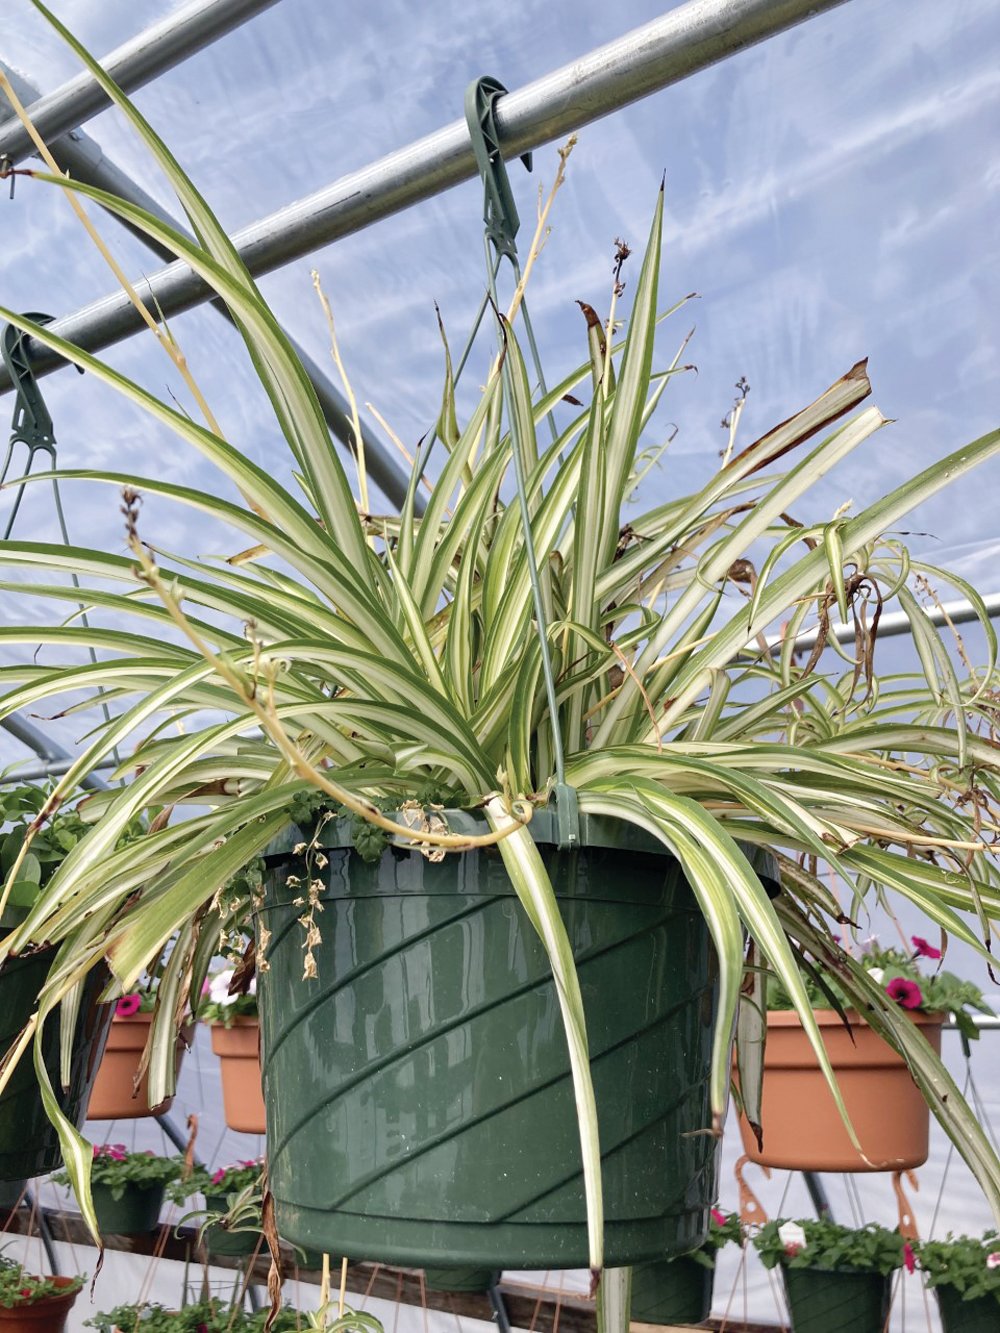 A DIFFERENT KIND OF SPIDER: Individuals looking for a hanging plant may consider spider plants, which remove 95 percent of toxins from interior spaces.